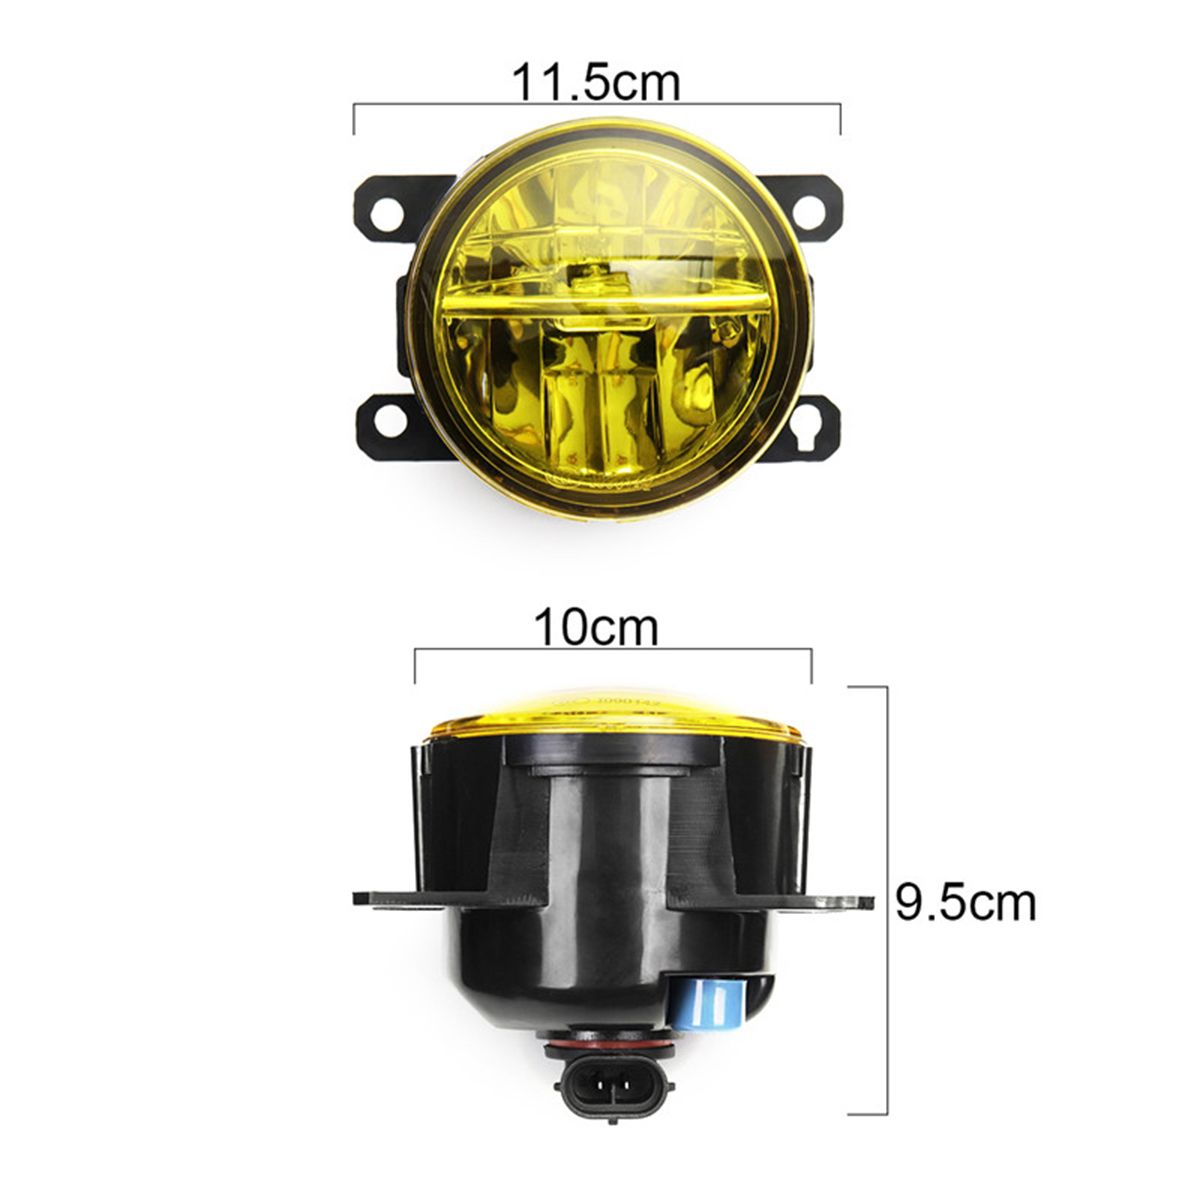 RightLeft-LED-Front-Fog-Light-Lamp-Lens-with-H8H11-Bulbs-Amber-Universal-For-Honda-Civic-Fit-Odyssey-1732027